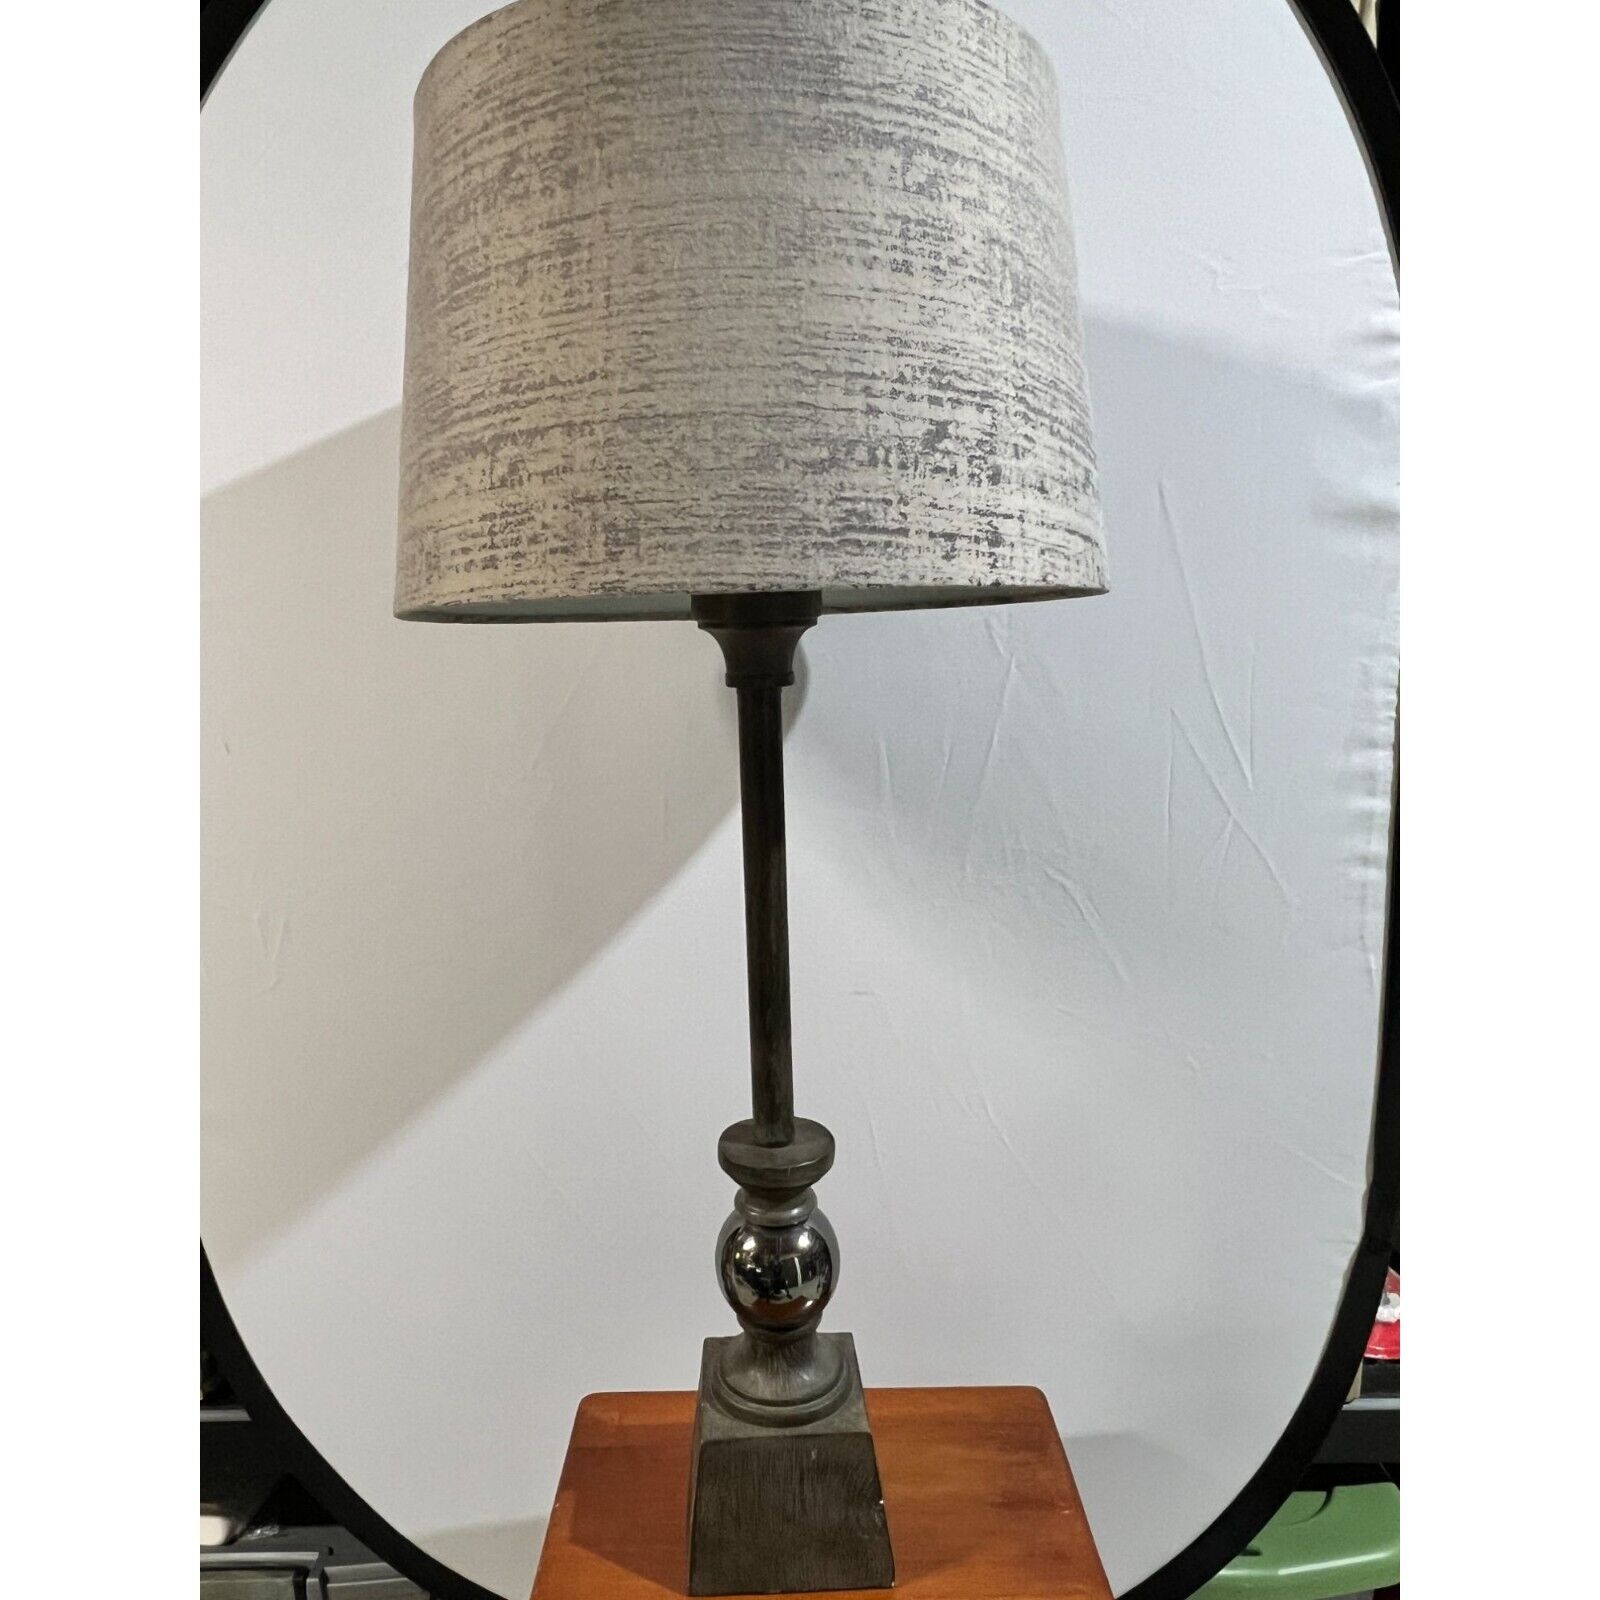 2 Matching Large Table Lamps